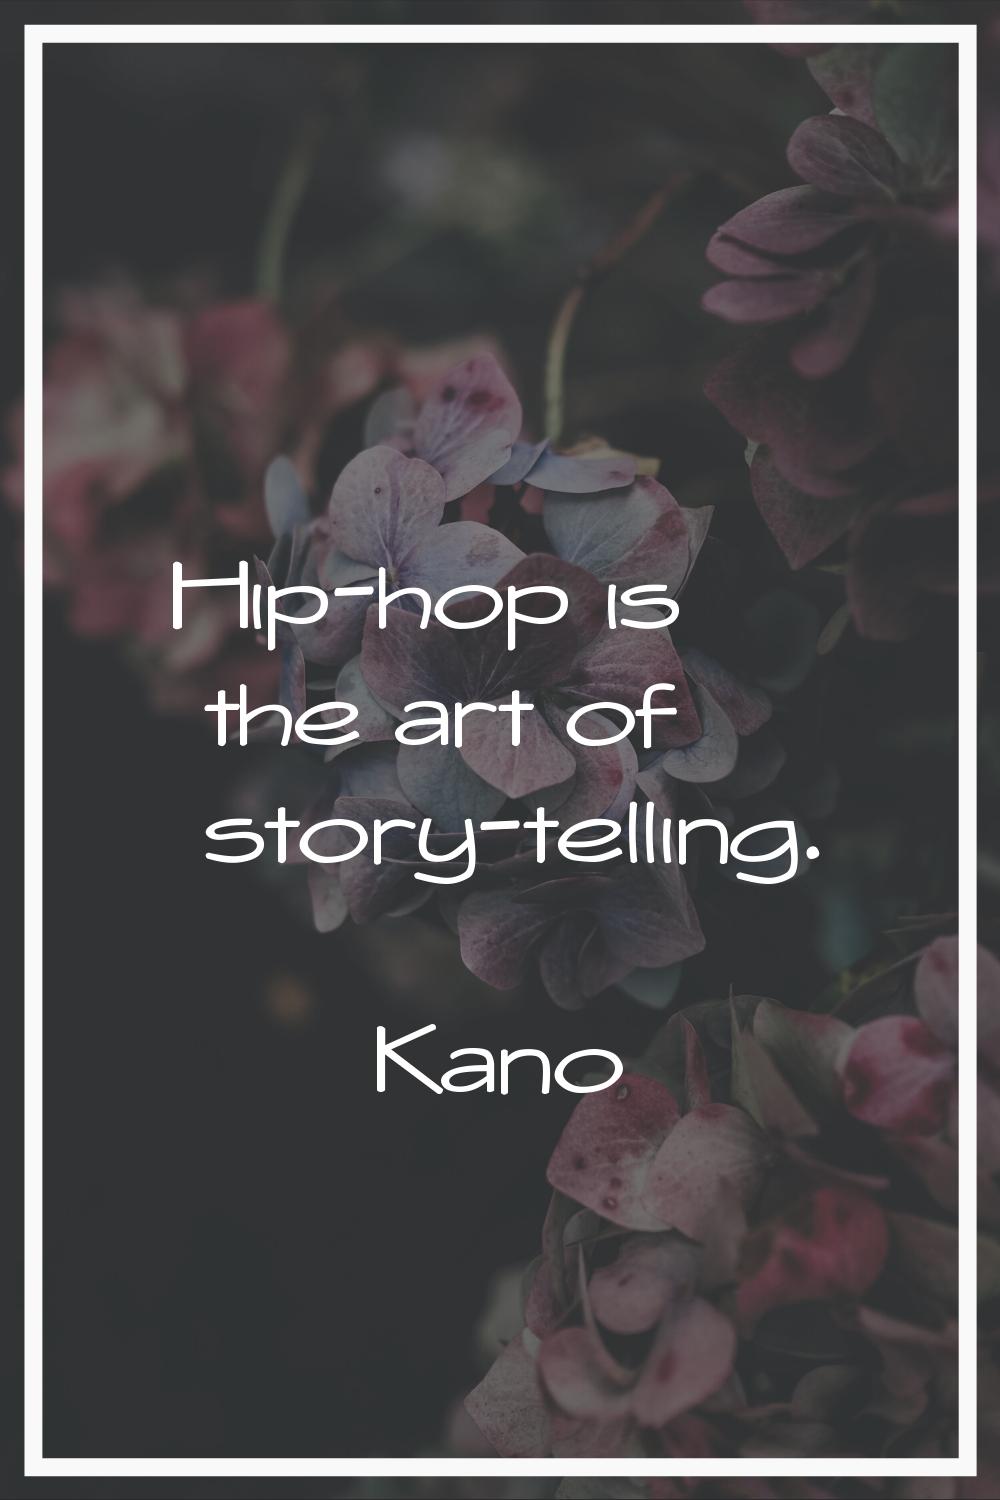 Hip-hop is the art of story-telling.